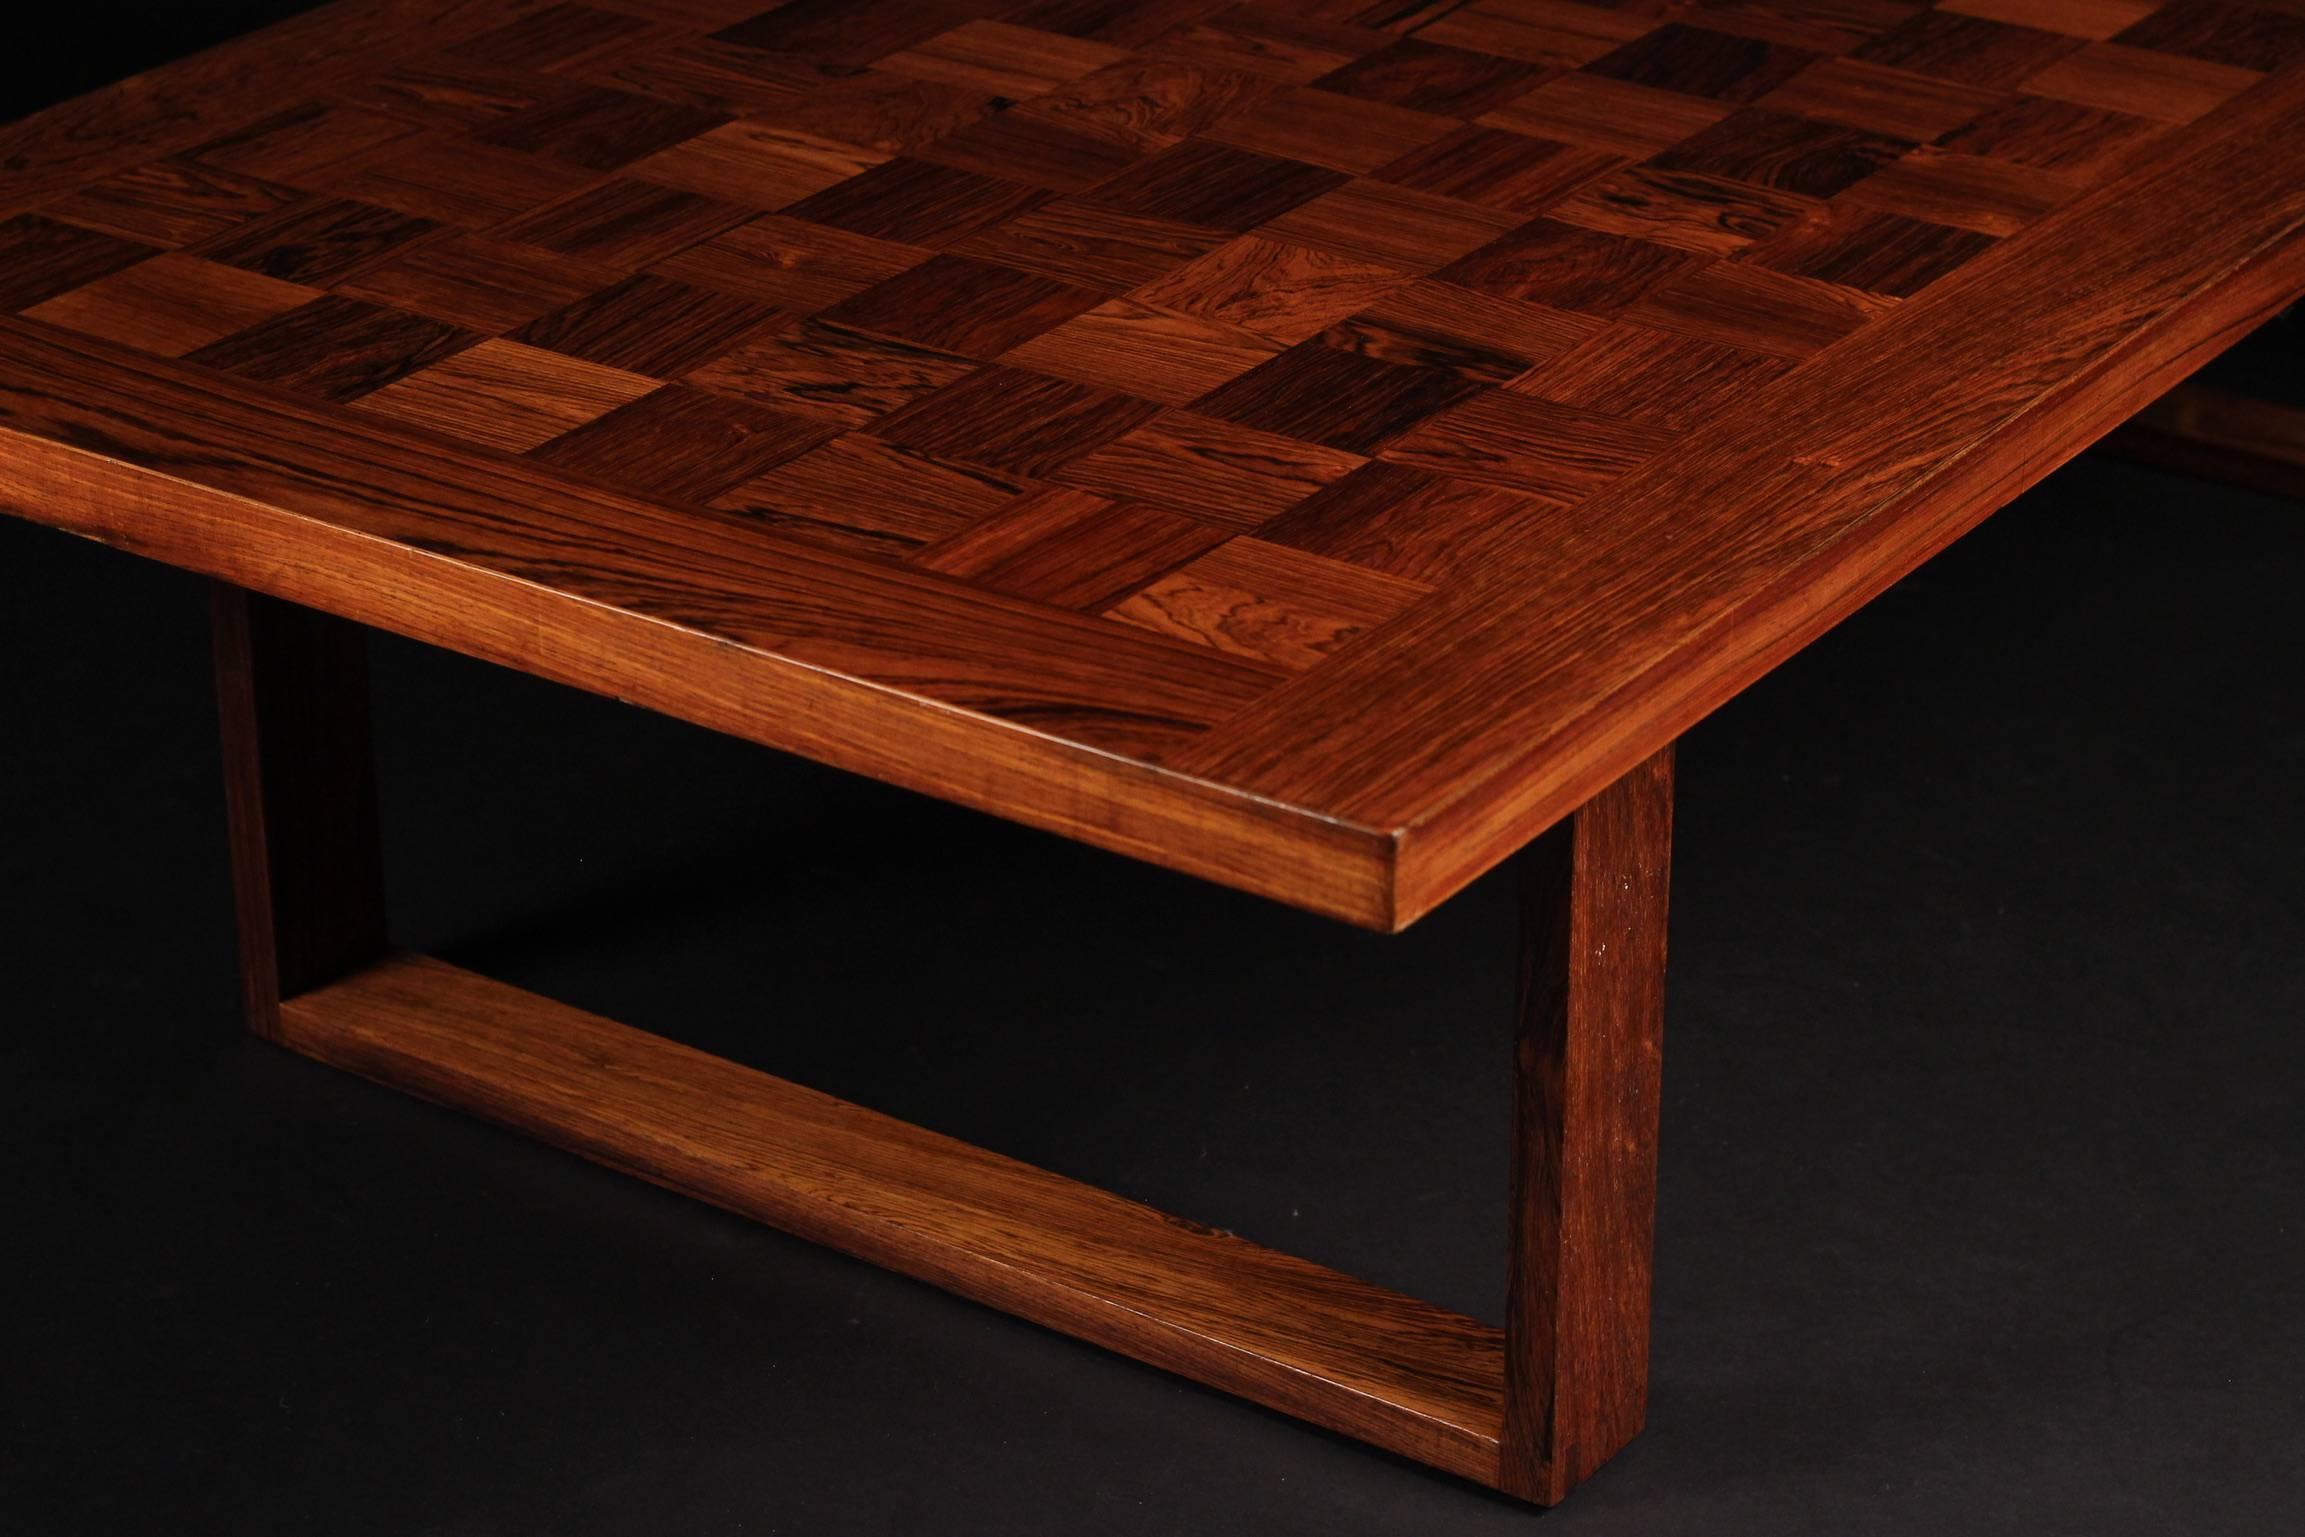 Danish Scandinavian Modern Square Rosewood Coffee or Cocktail Table by Poul Cadovius For Sale